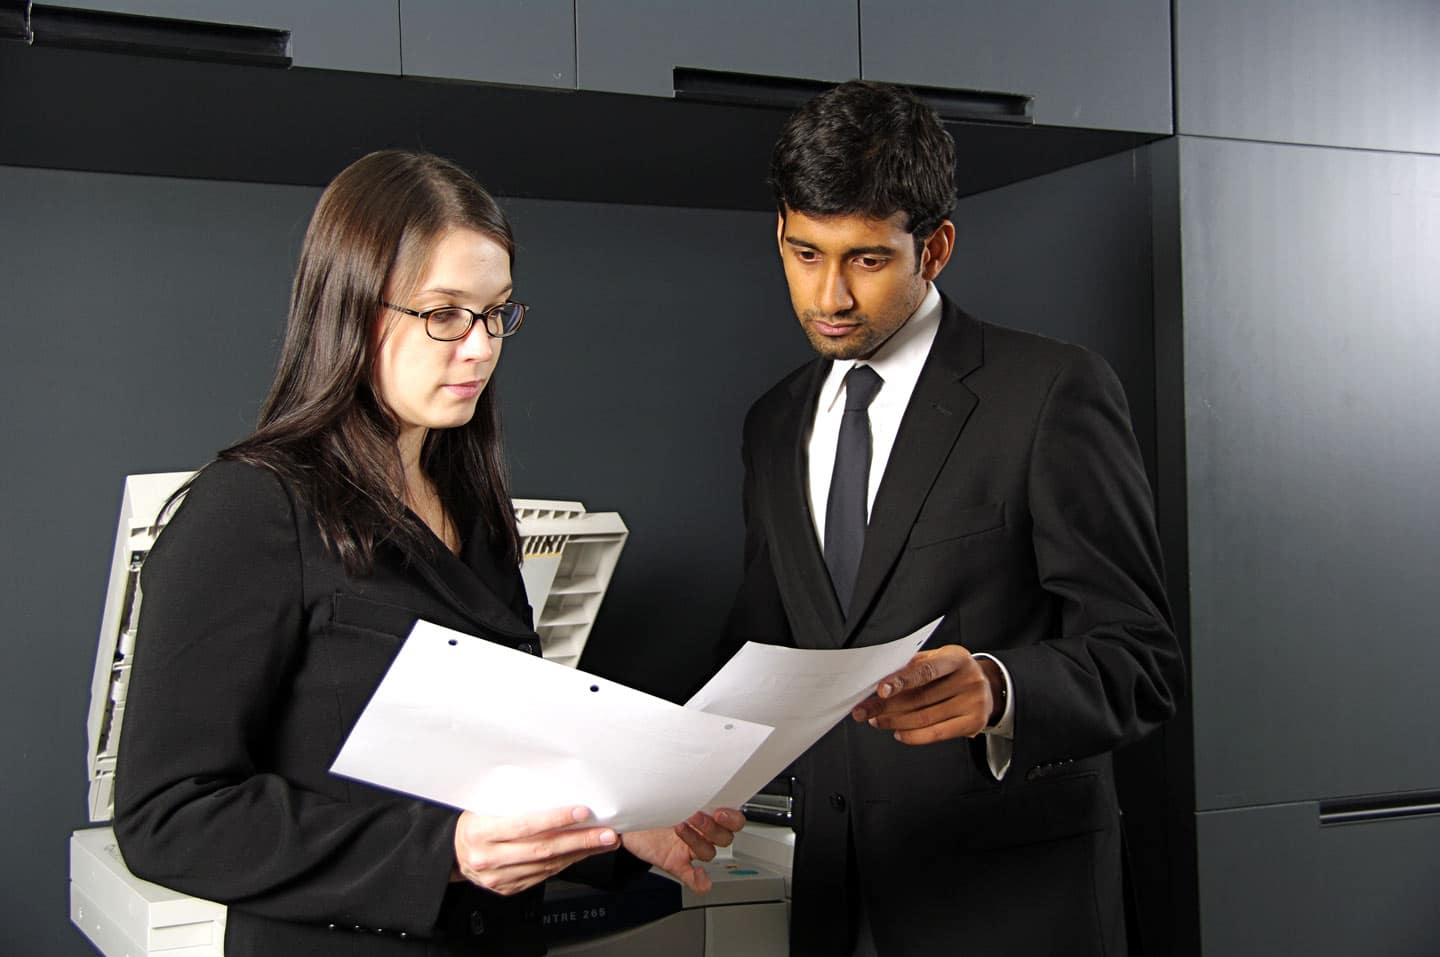 An obviously posed photo of two business type people in front of a photocopier intently looking at a document